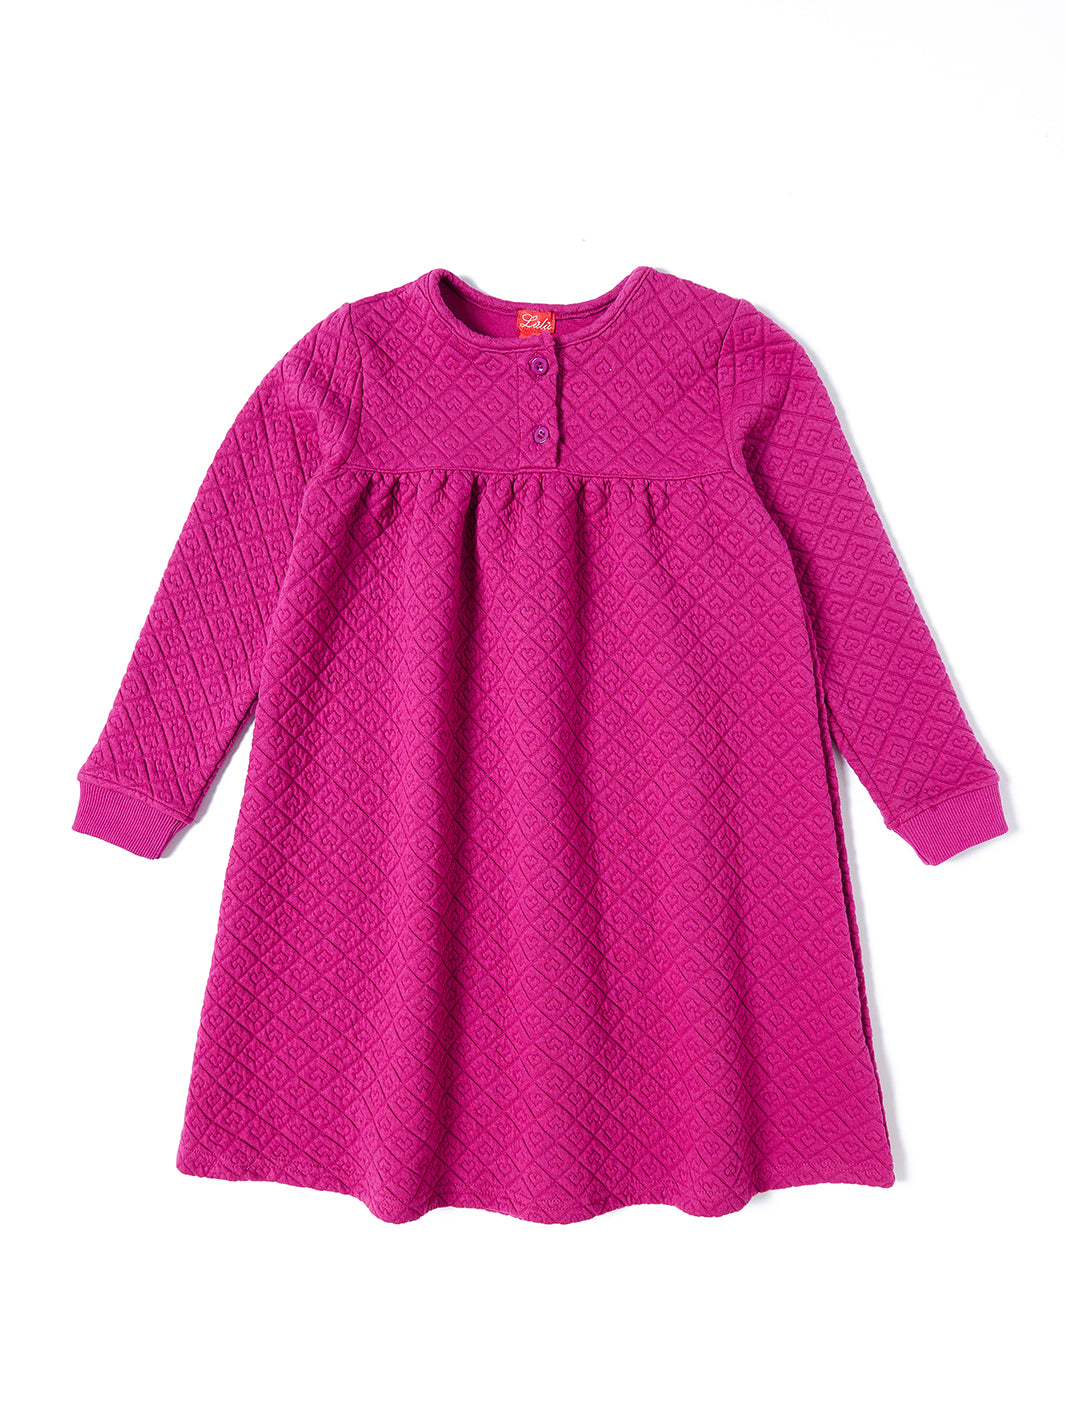 Quilted Heart Dress - Violet